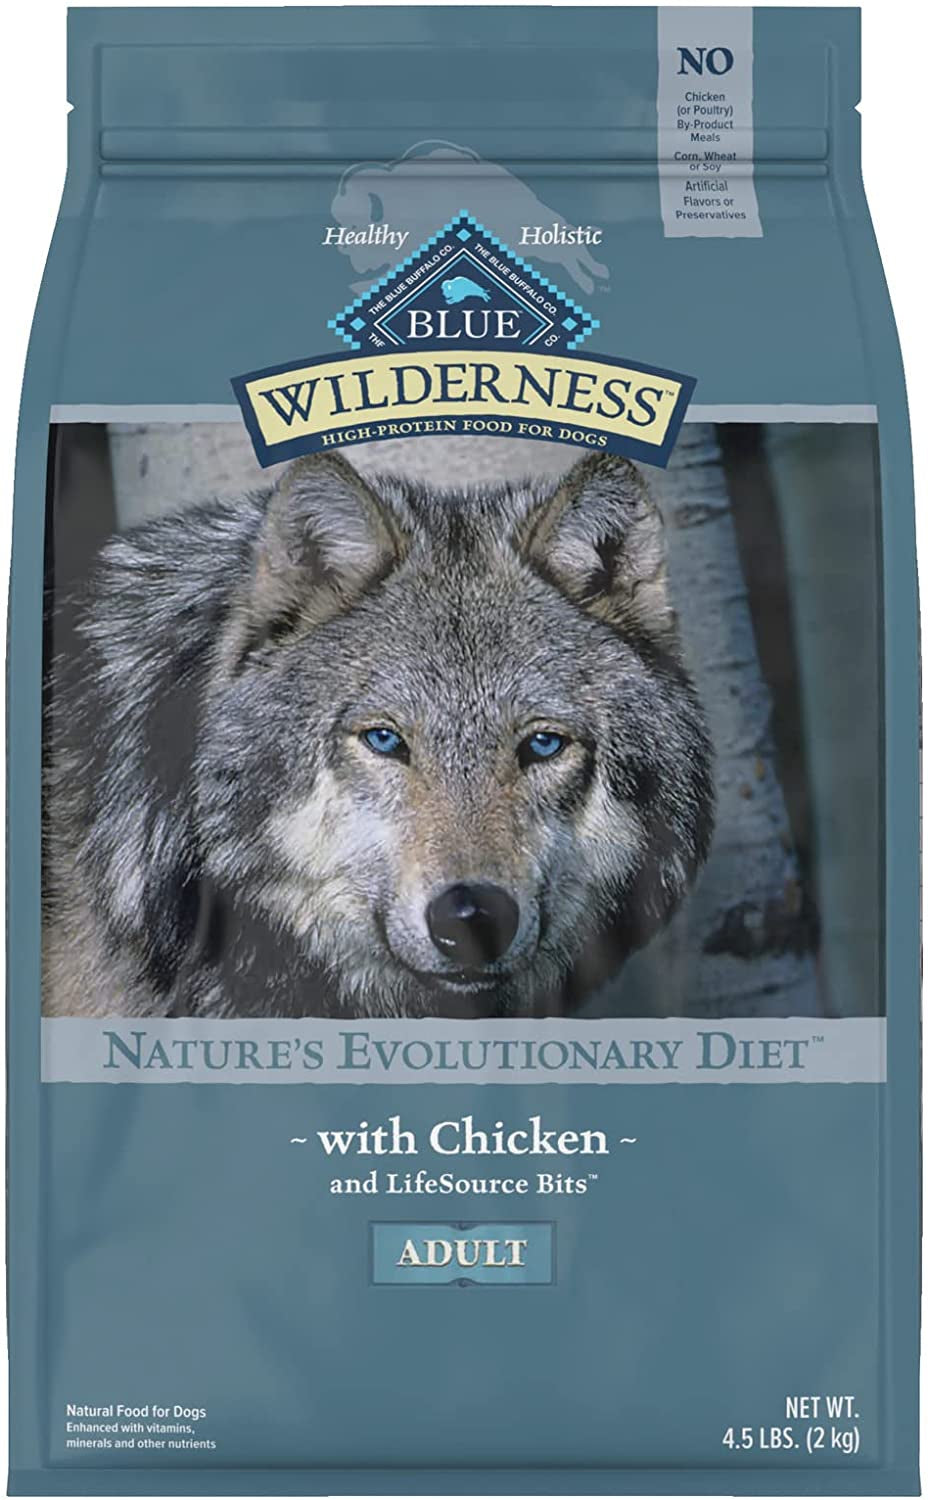 Blue Buffalo Wilderness High Protein, Natural Adult Dry Dog Food.